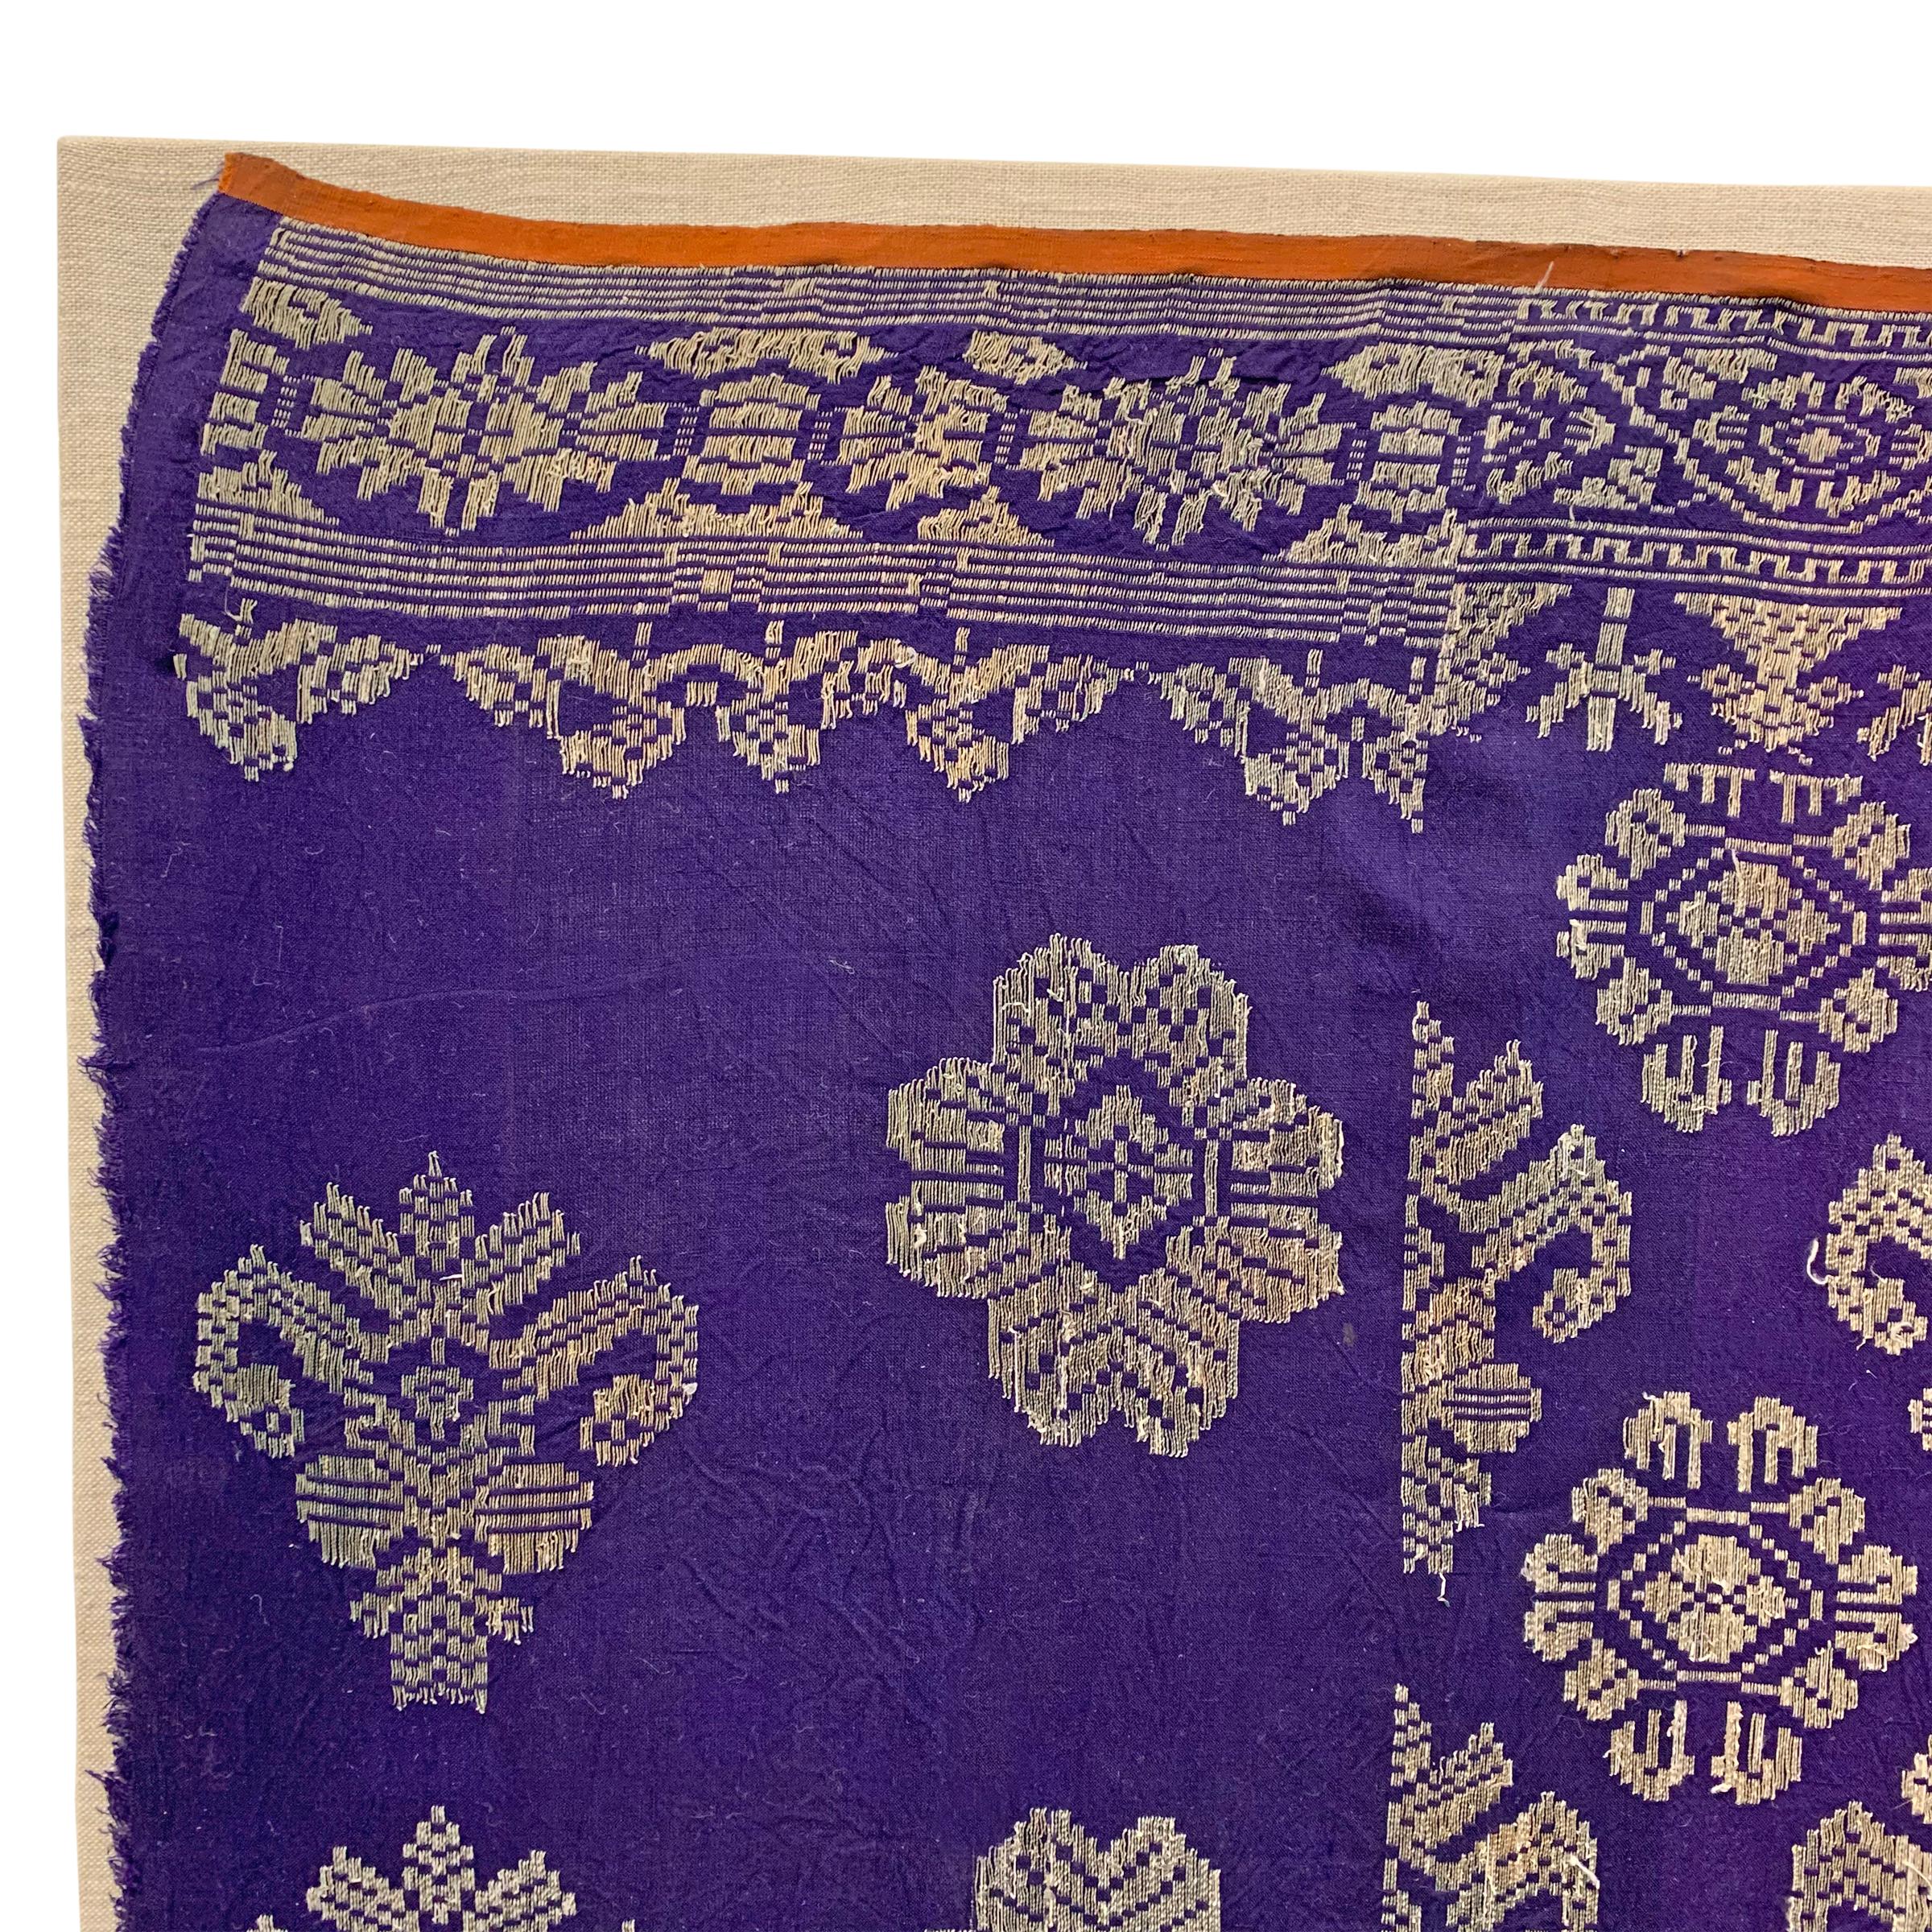 A fantastic brilliant violet early 20th century Indonesian textile with metallic silver thread embroidery woven with a stylized floral pattern and mounted on a custom linen wrapped board. It's likely that this panel was originally meant to be used